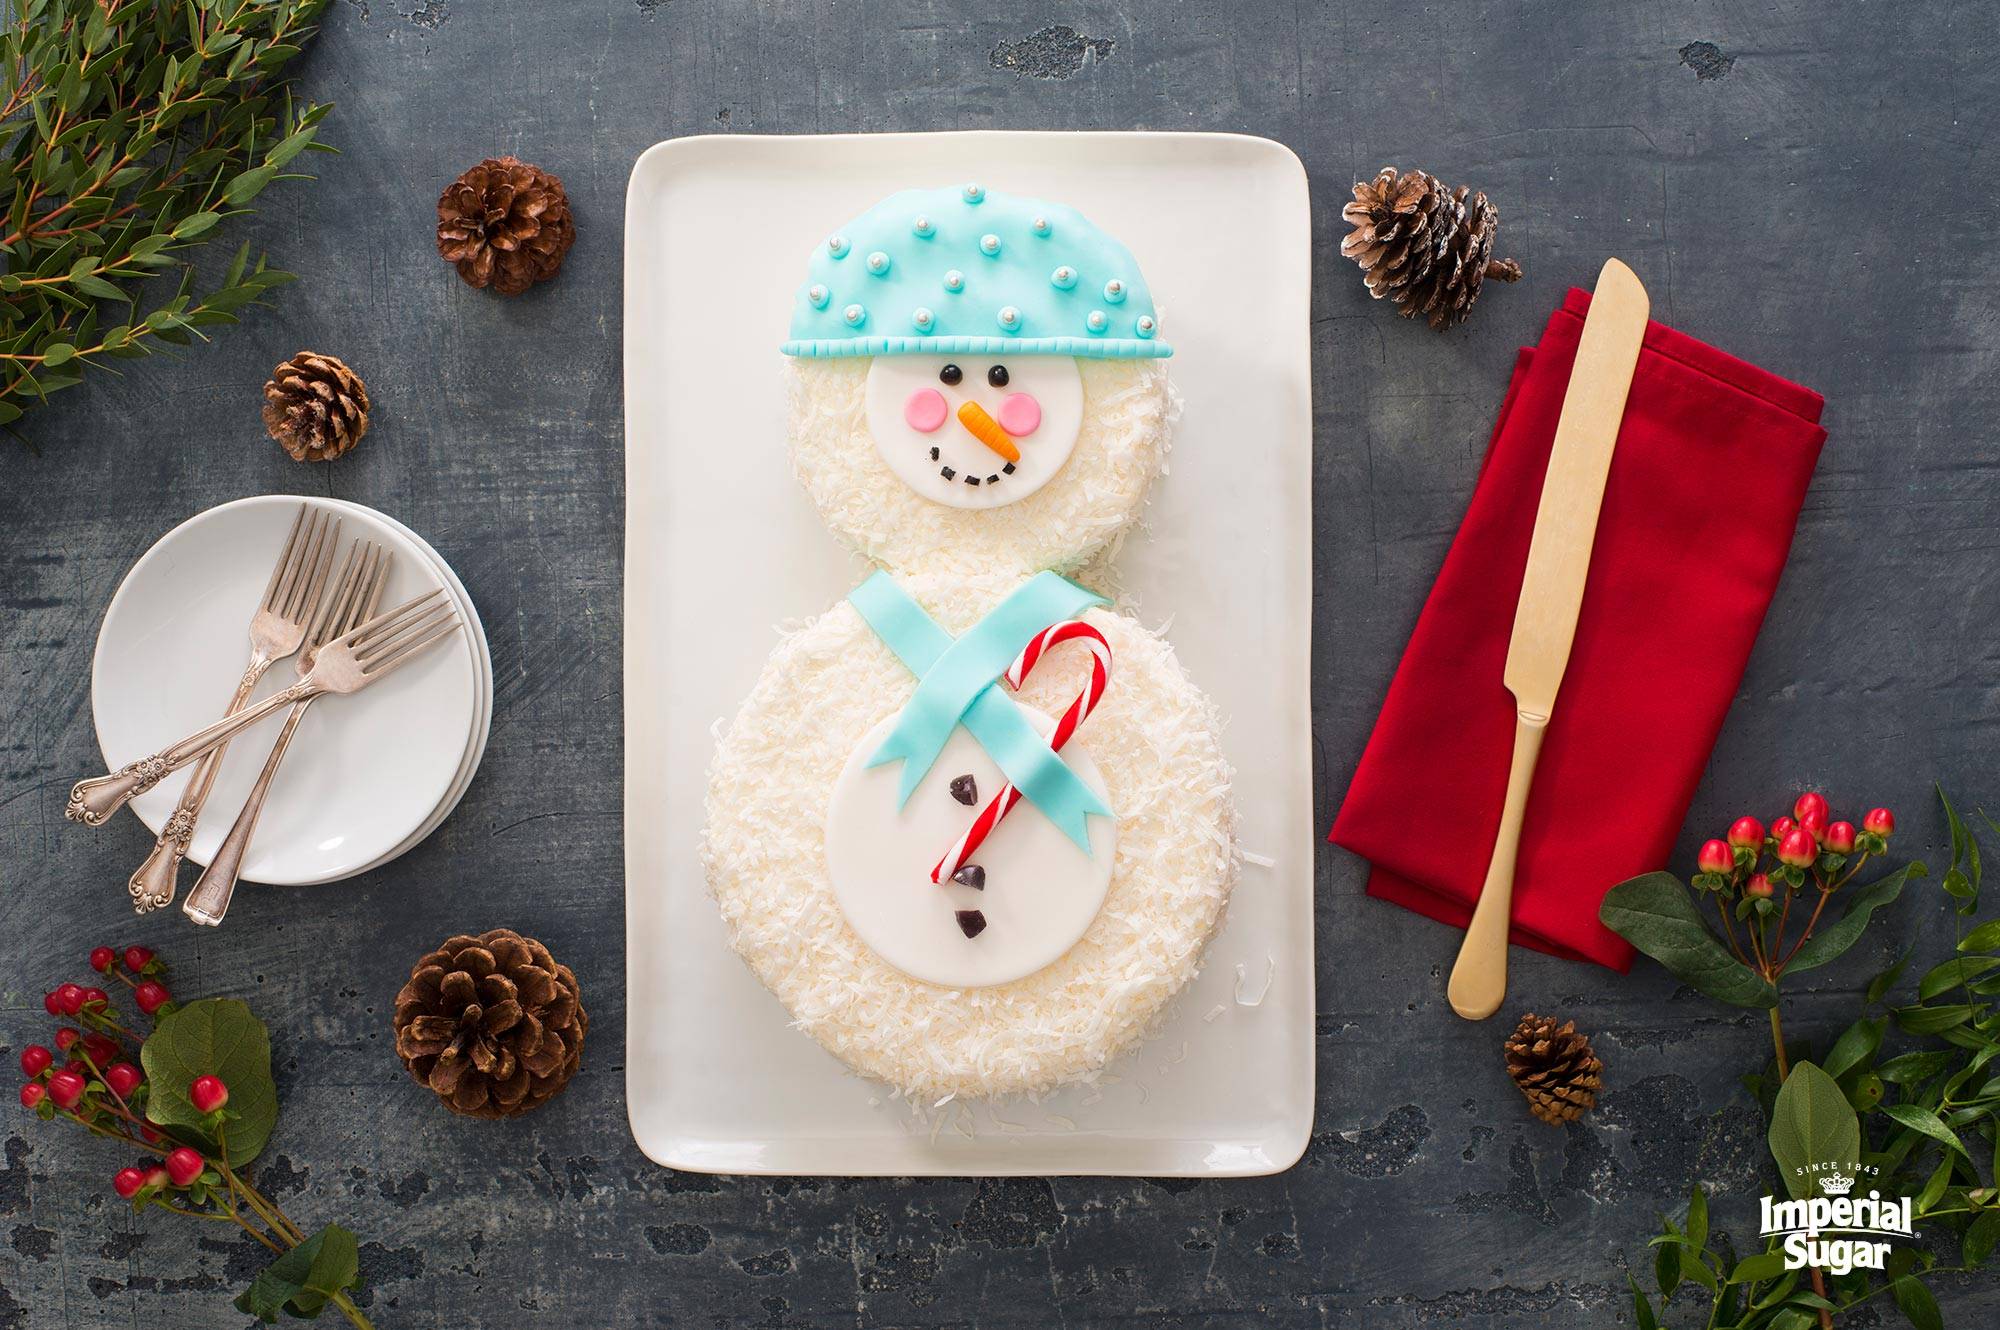 How to Make a Fun and Easy Snowman Cake - Delishably